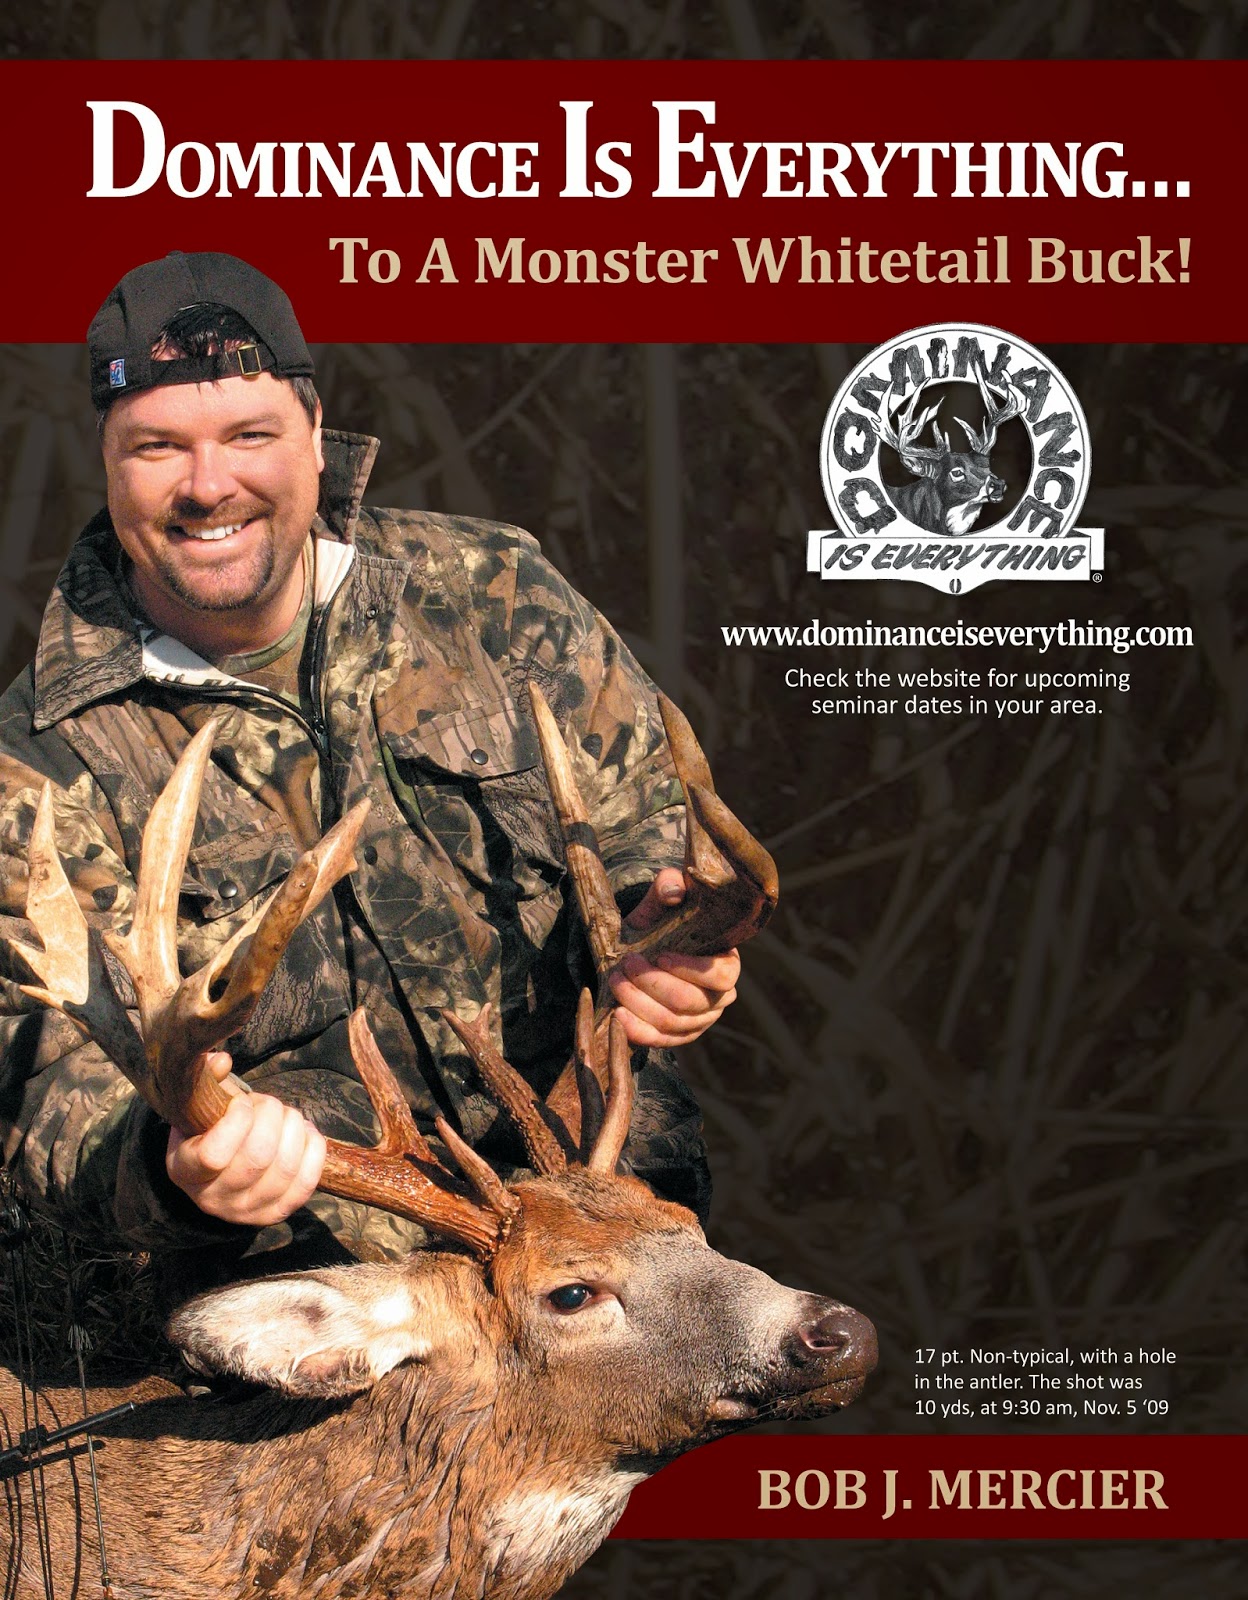  Learn about whitetail deer herds, and hunting kings